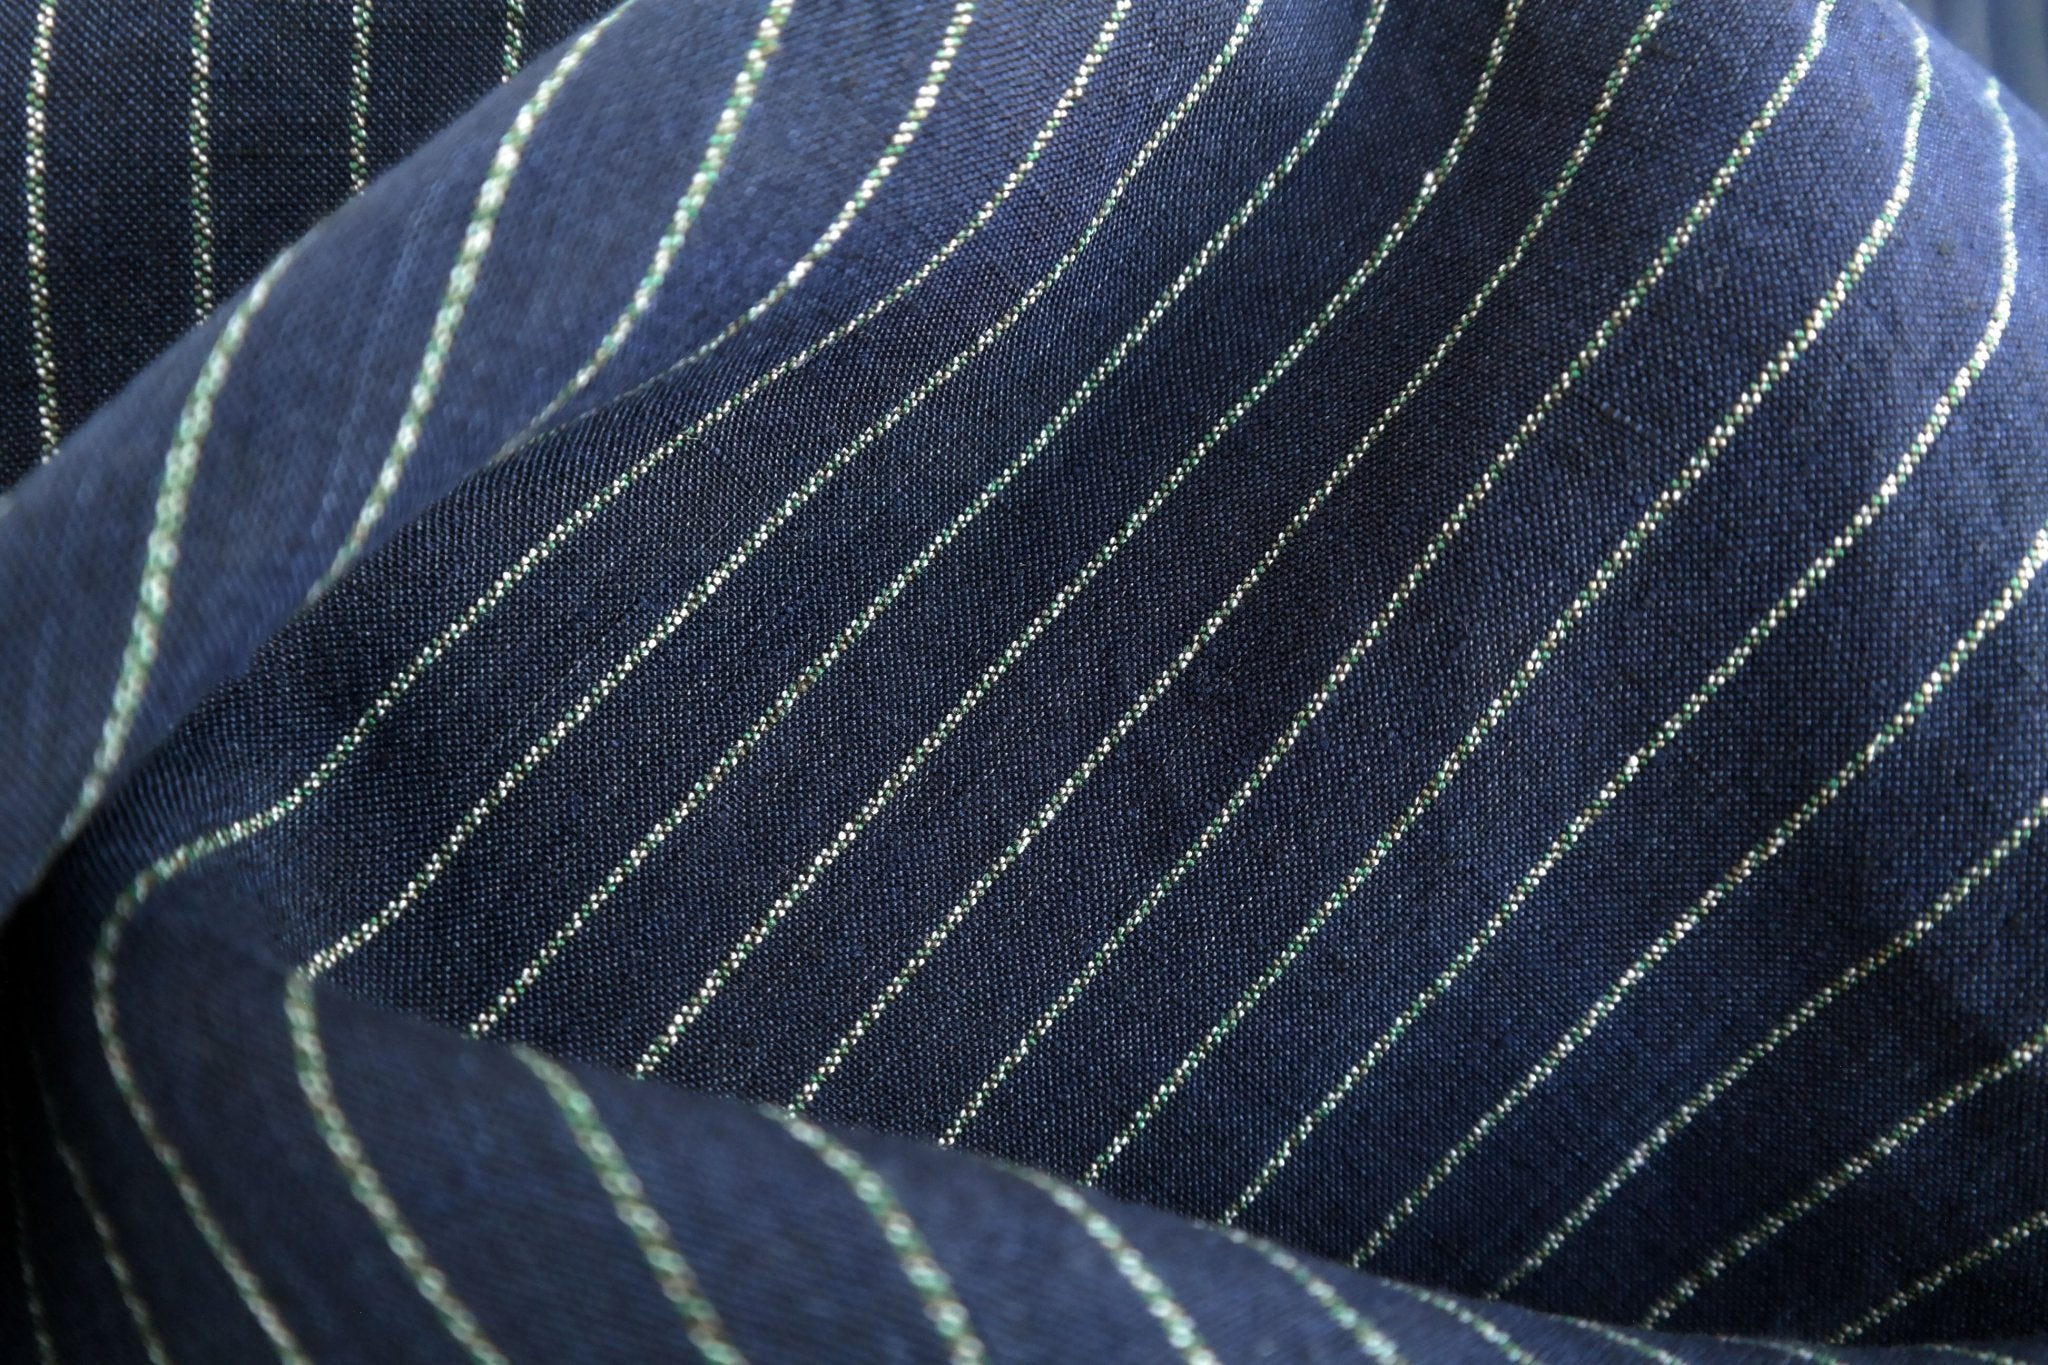 100% Linen Fabric with Multi-Color Pin Stripe 7089 7090 - The Linen Lab - Navy 7090